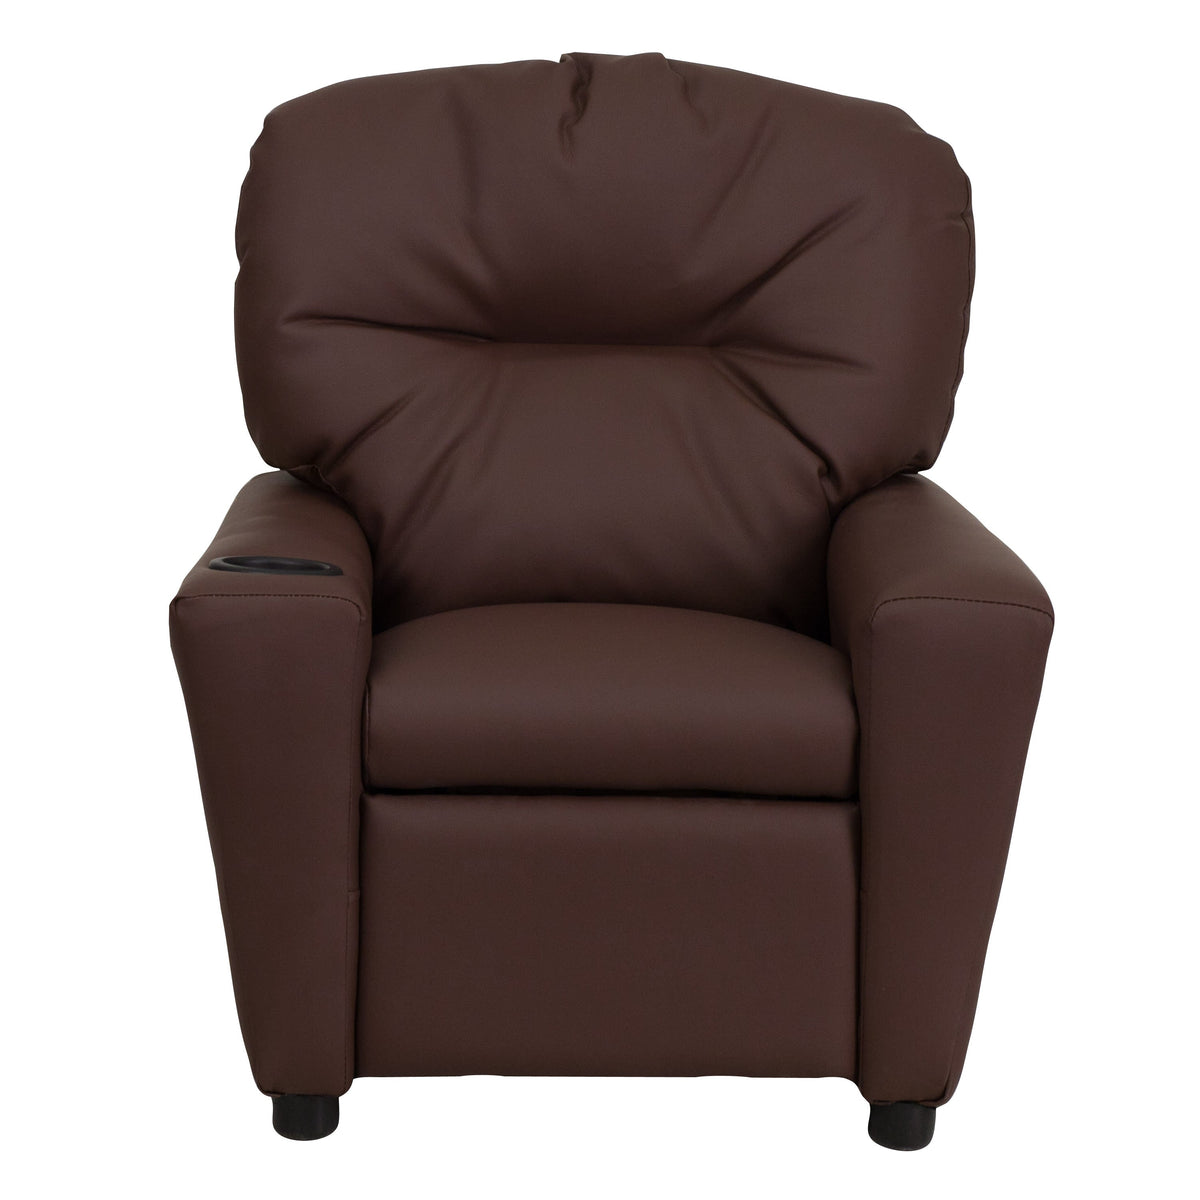 Brown LeatherSoft |#| Contemporary Brown LeatherSoft Kids Recliner with Cup Holder - Hardwood Frame